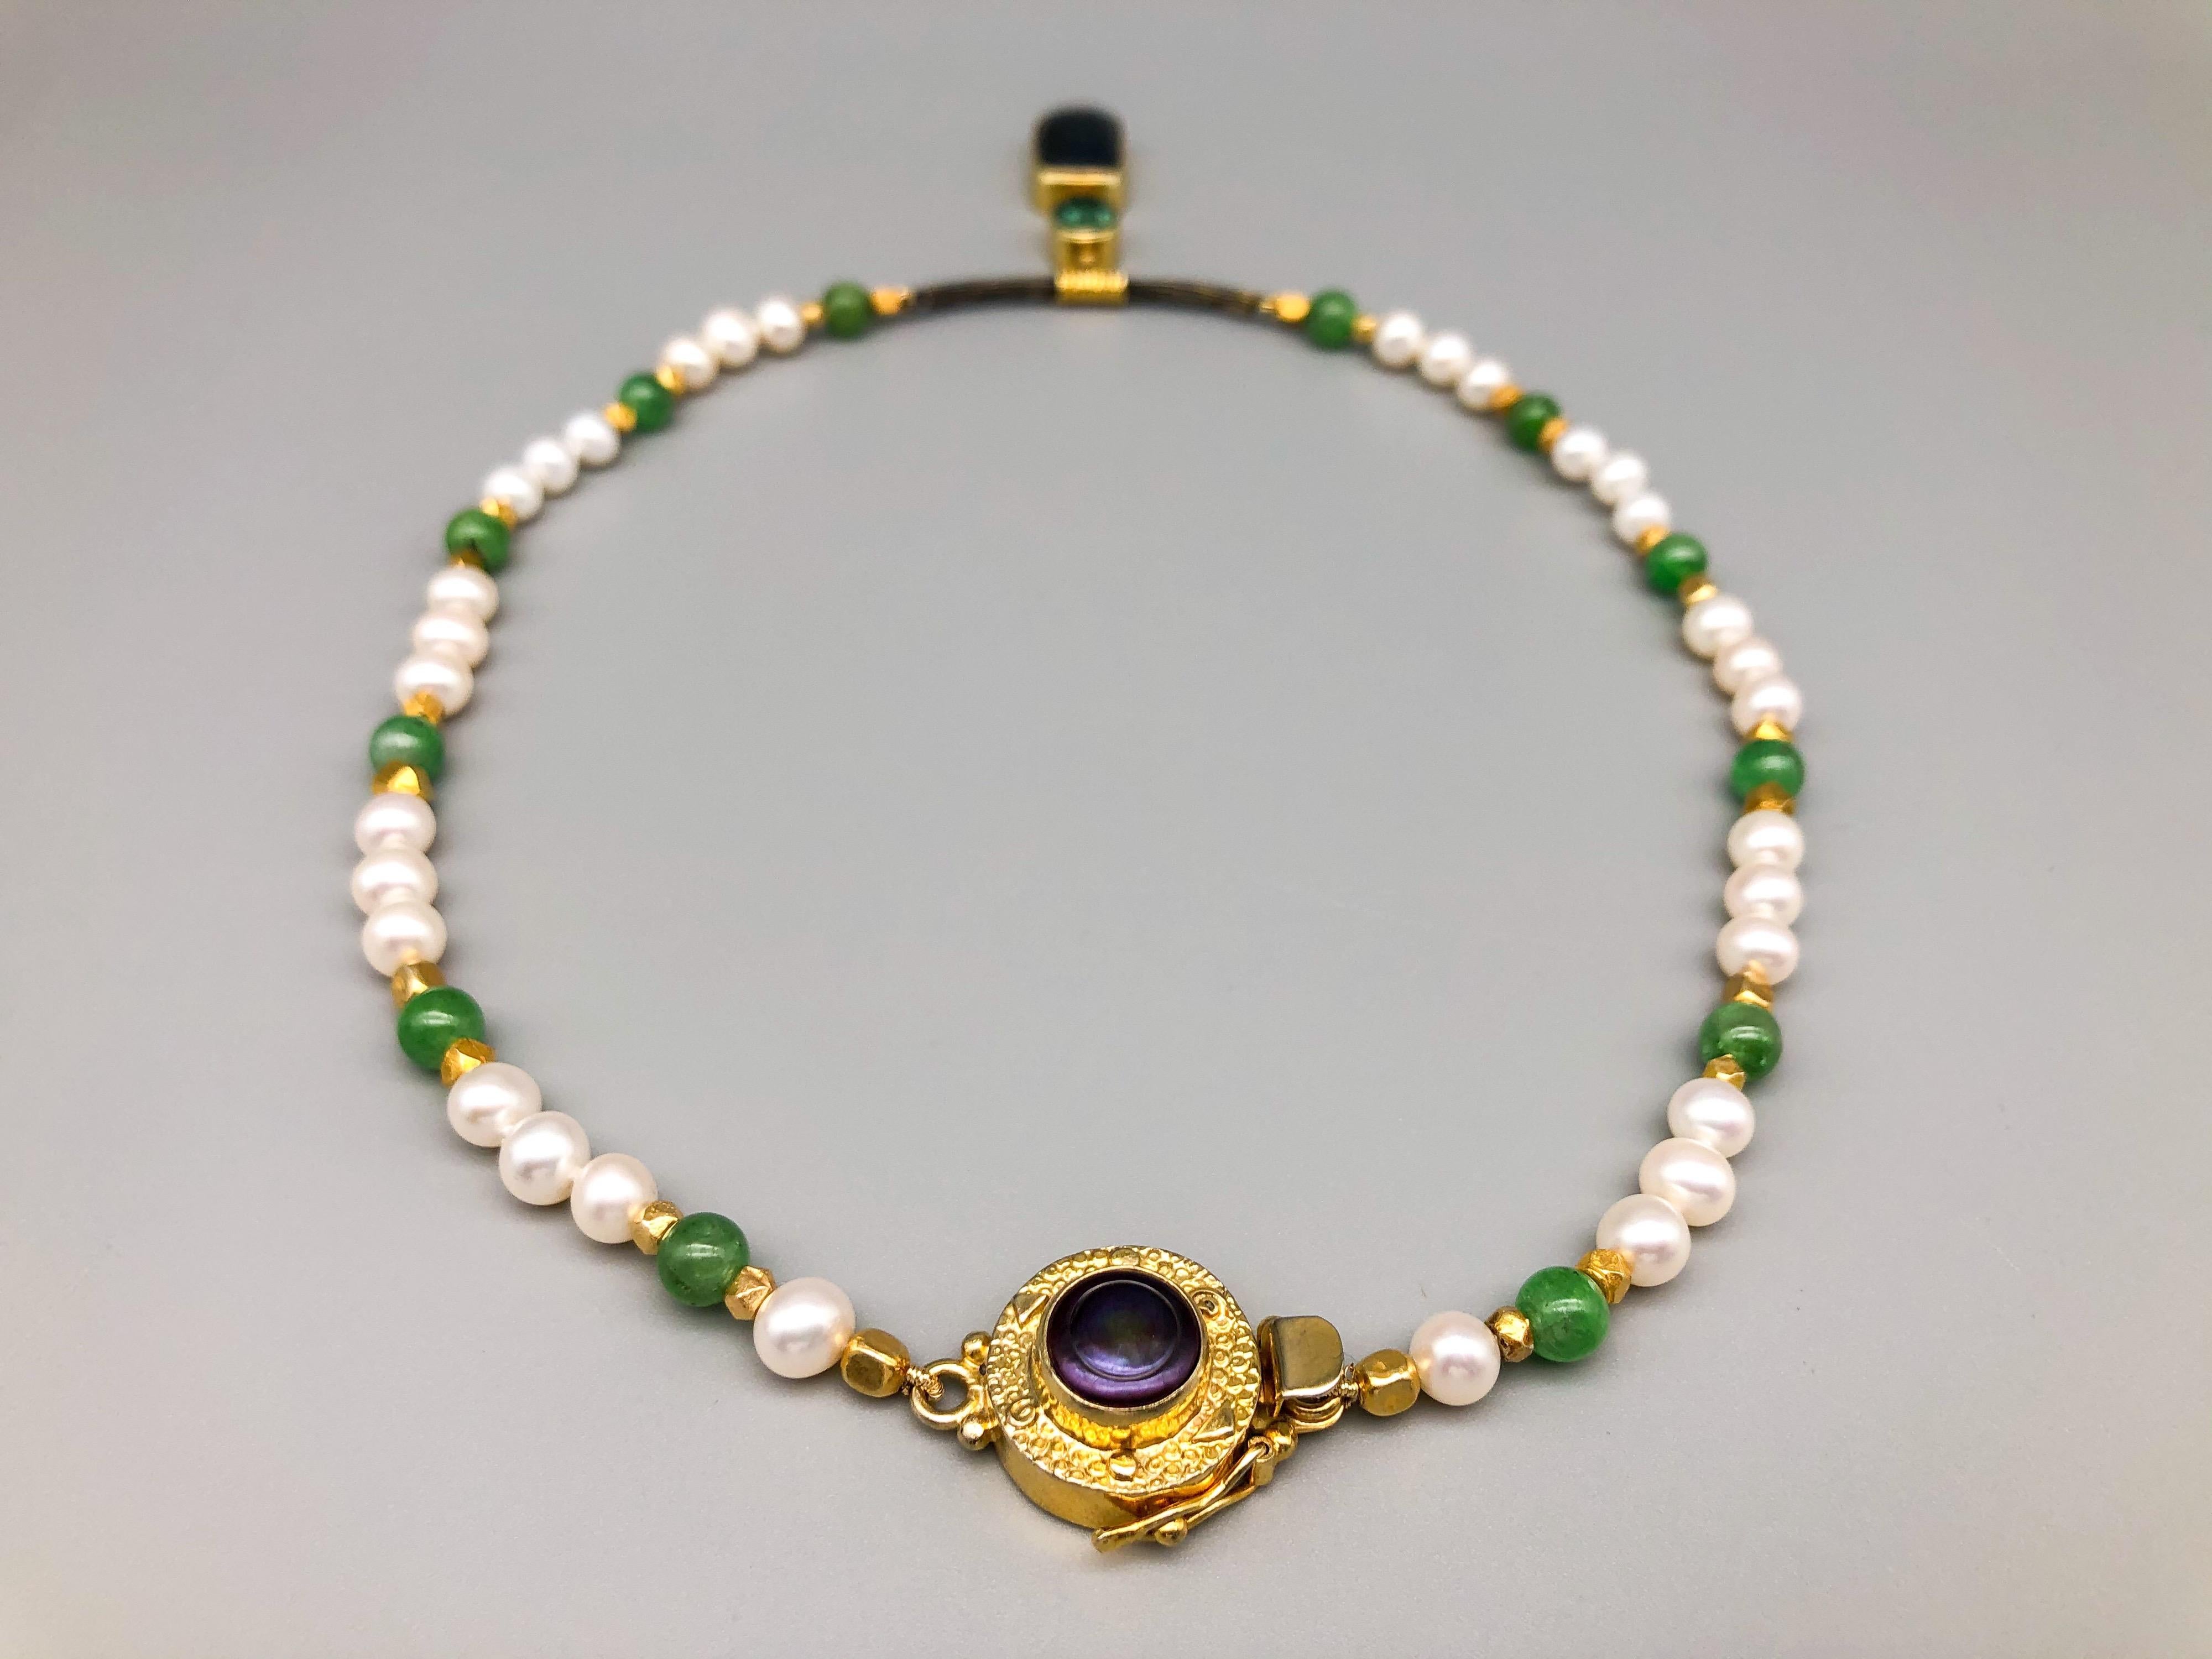 Women's or Men's A.Jeschel Pendant Necklace with Pearls and Emerald beads is dreamy. For Sale